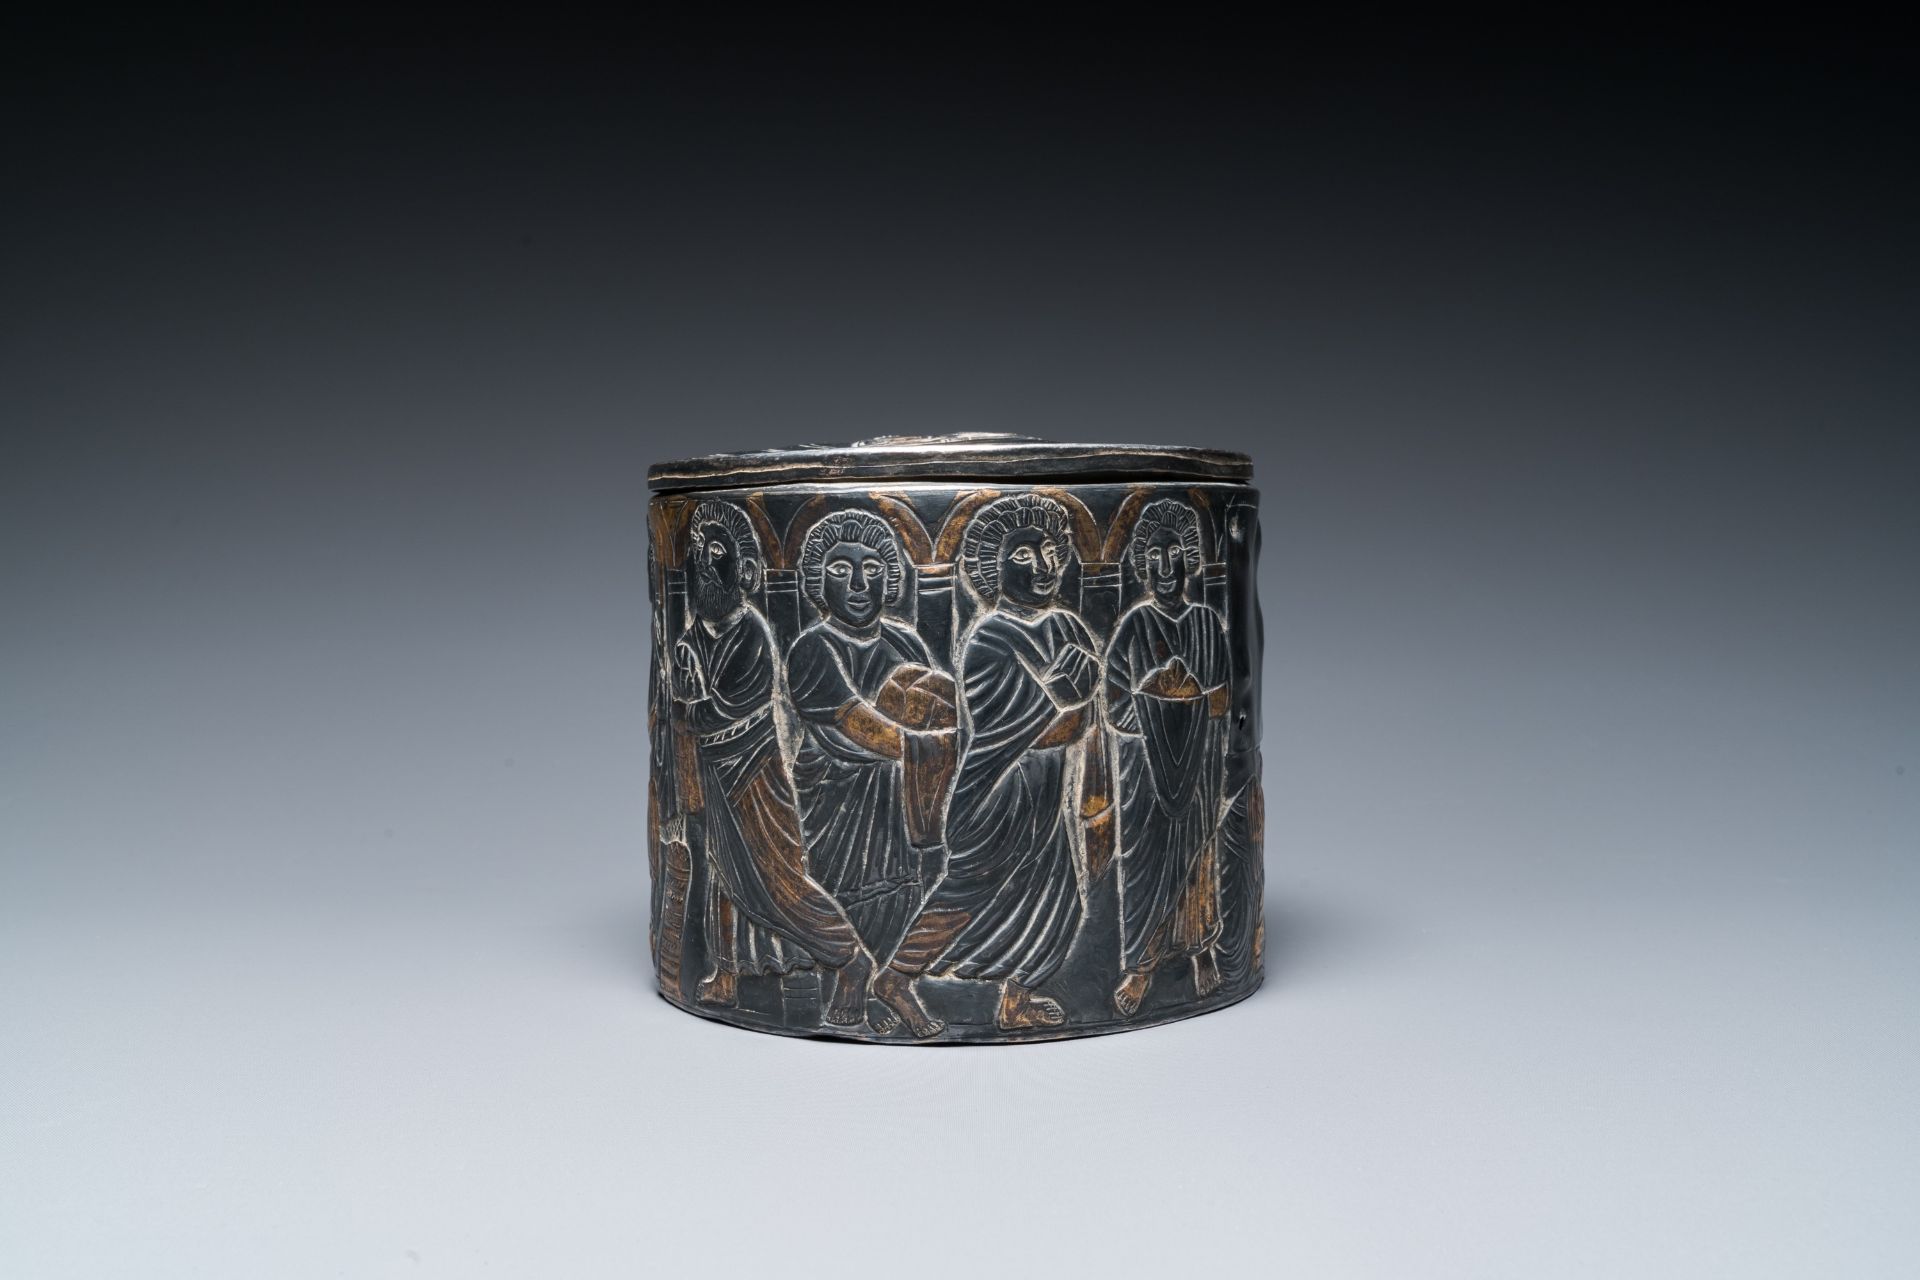 A probably Byzantine parcel-gilt silver pyxis, possibly Italy, 14th C. or later - Image 5 of 7